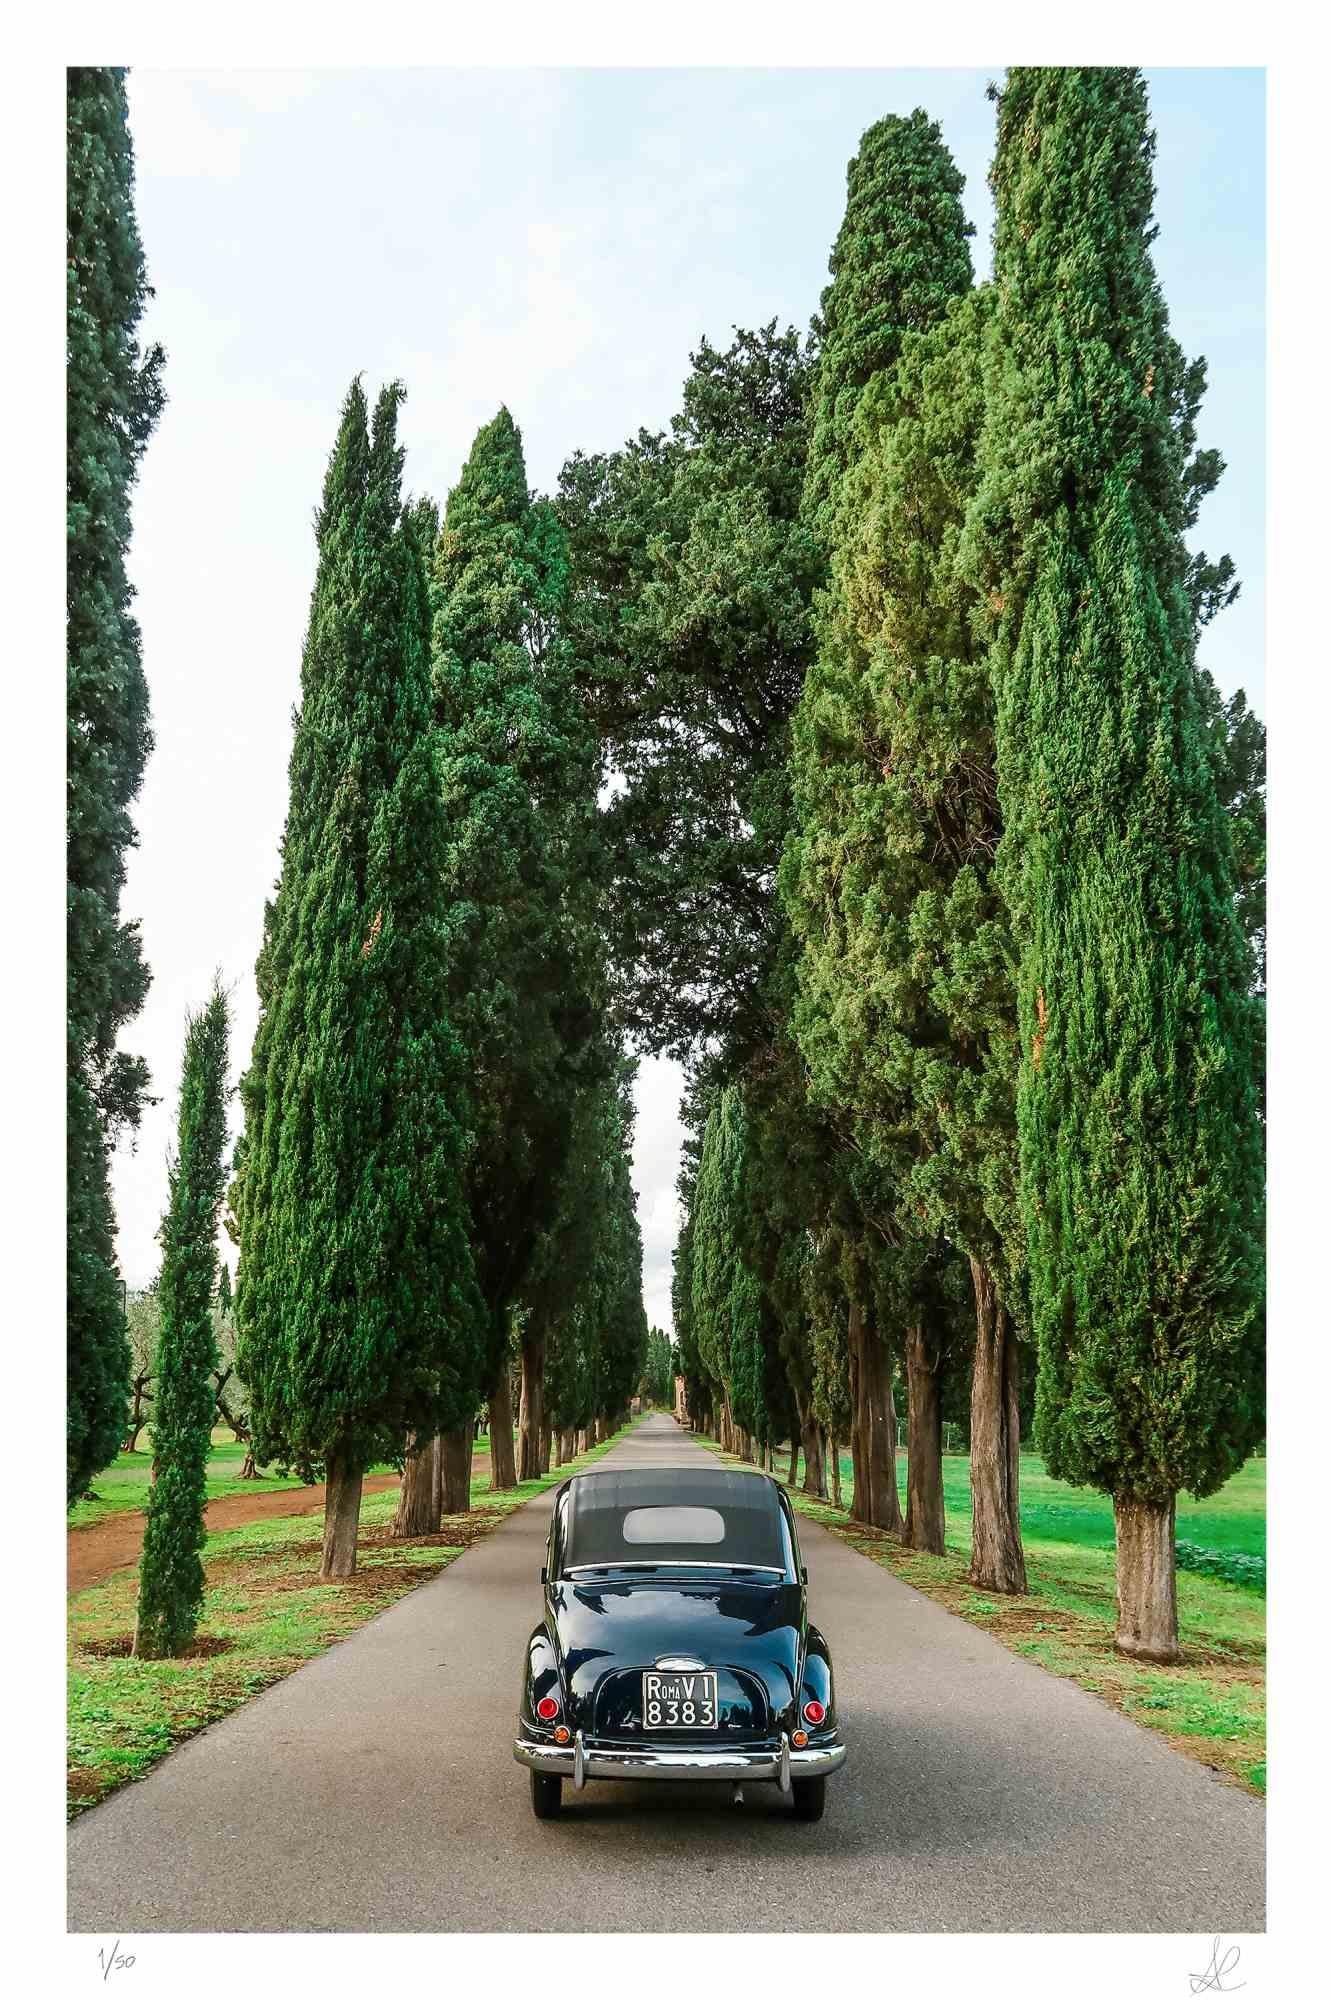 Topolino is a photograph taken by Amanda Ludovisi in 2018.

It represents the car Fiat Topolino in an elegant boulevard. This is a giclée print on Canson Baryta Matt paper. Limited edition of 50 copies.

Monogrammed on the lower right and numbered